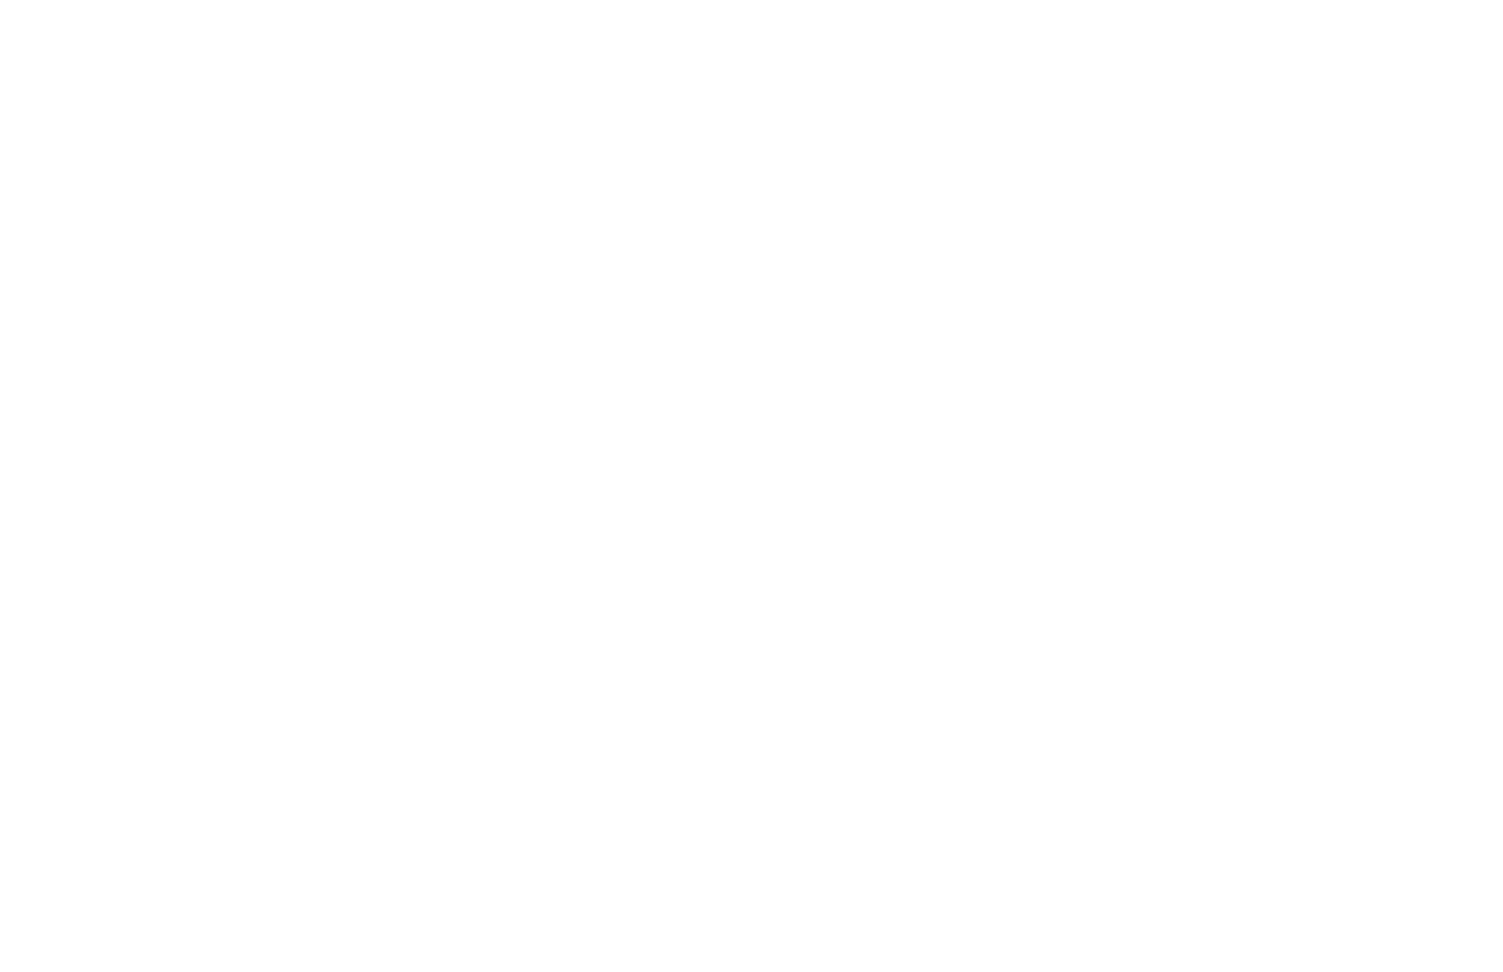 Sister Swap: Christmas in the City logo